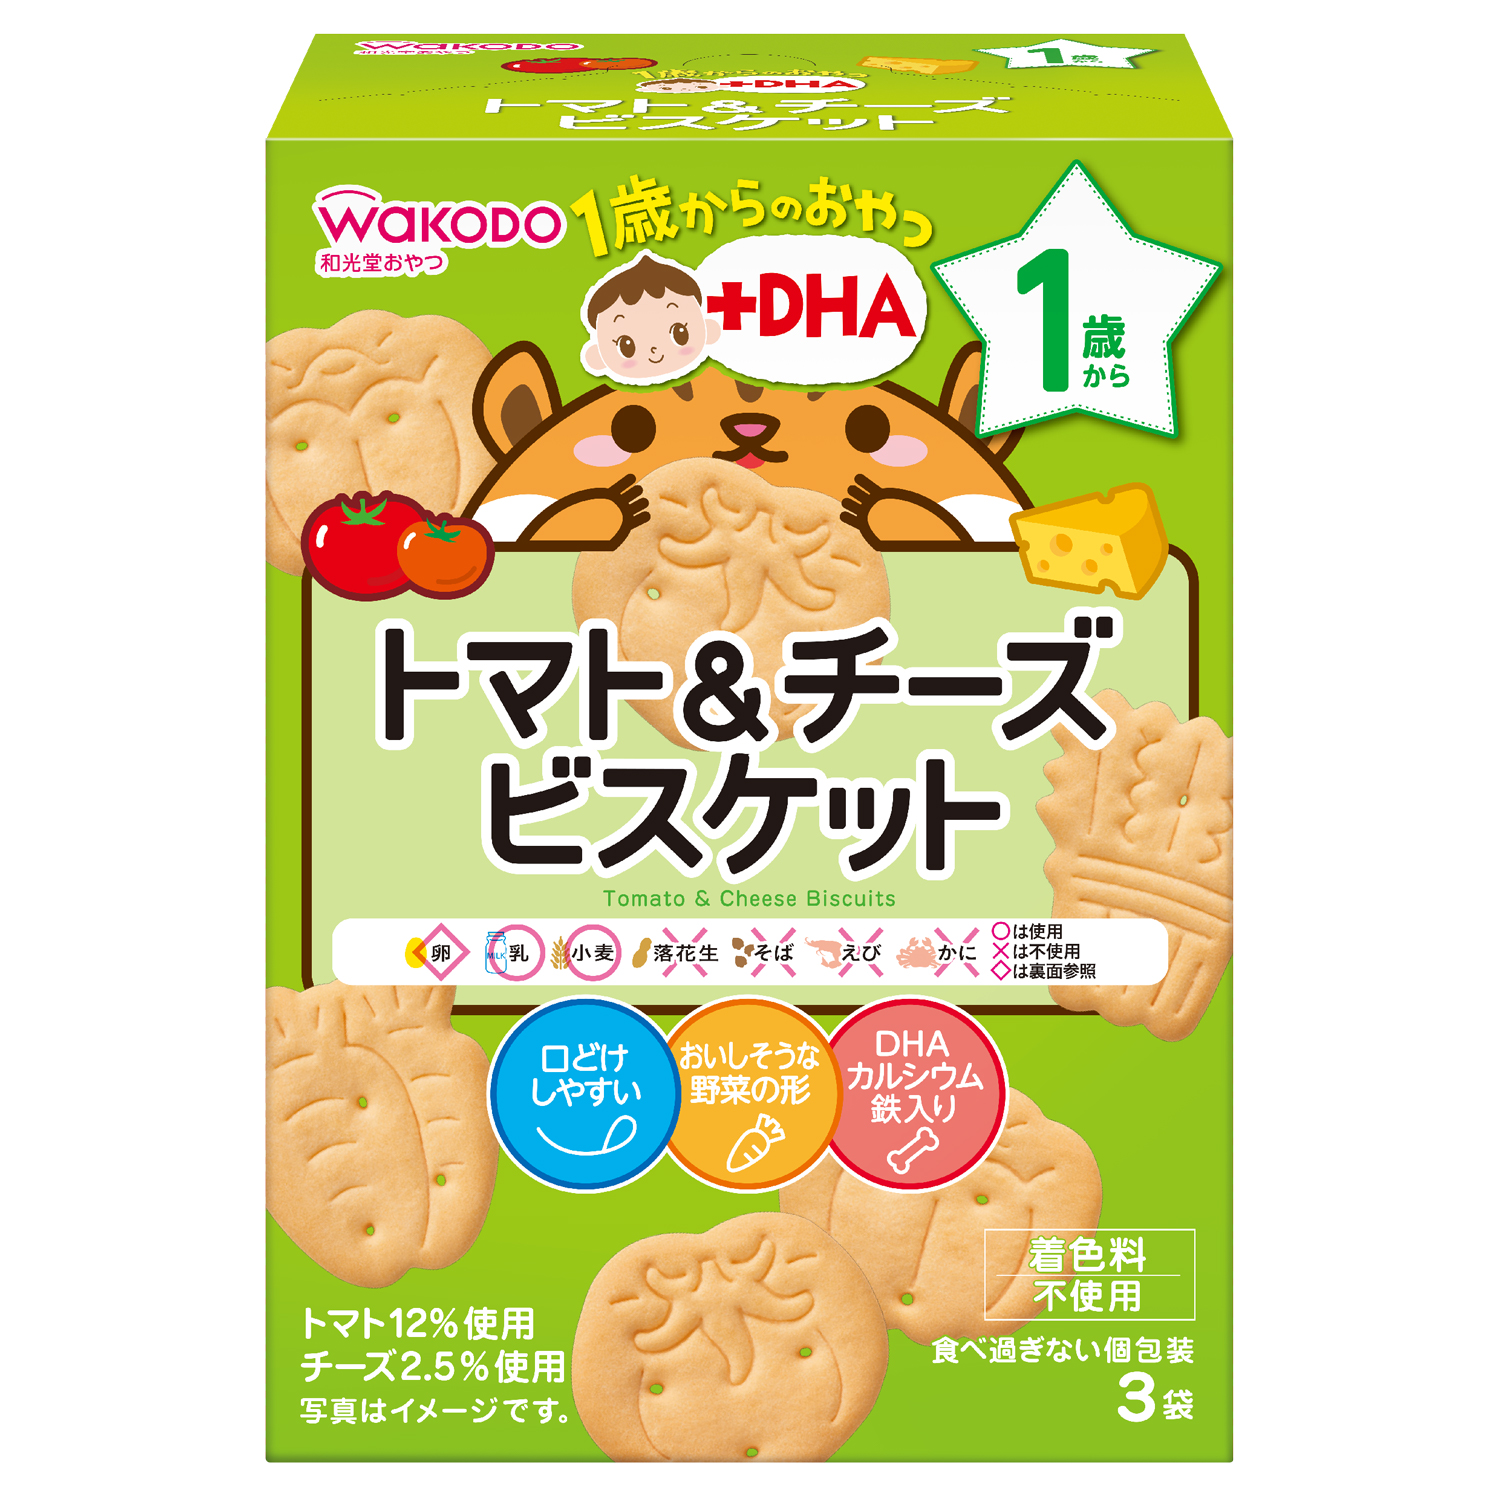 WAKODO Tomato And Cheese Biscuit (Bundle of 6)